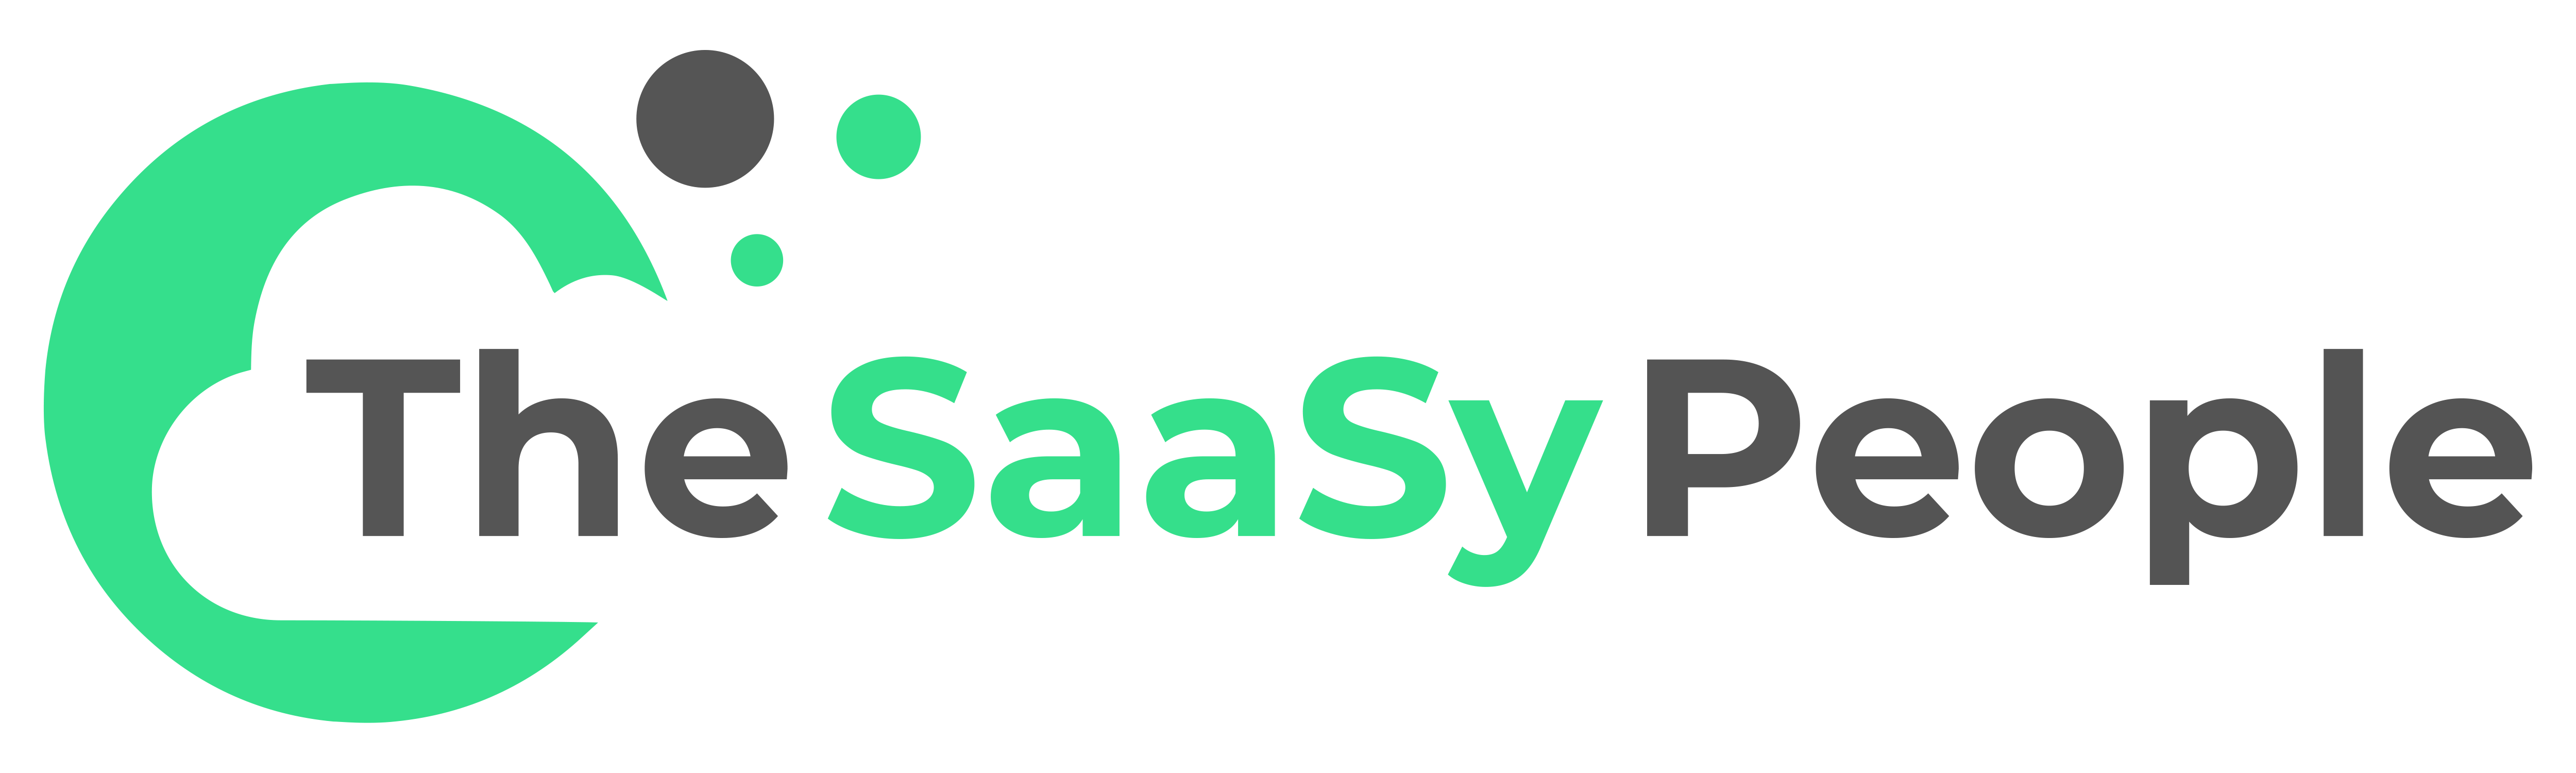 The SaaSy People Logo